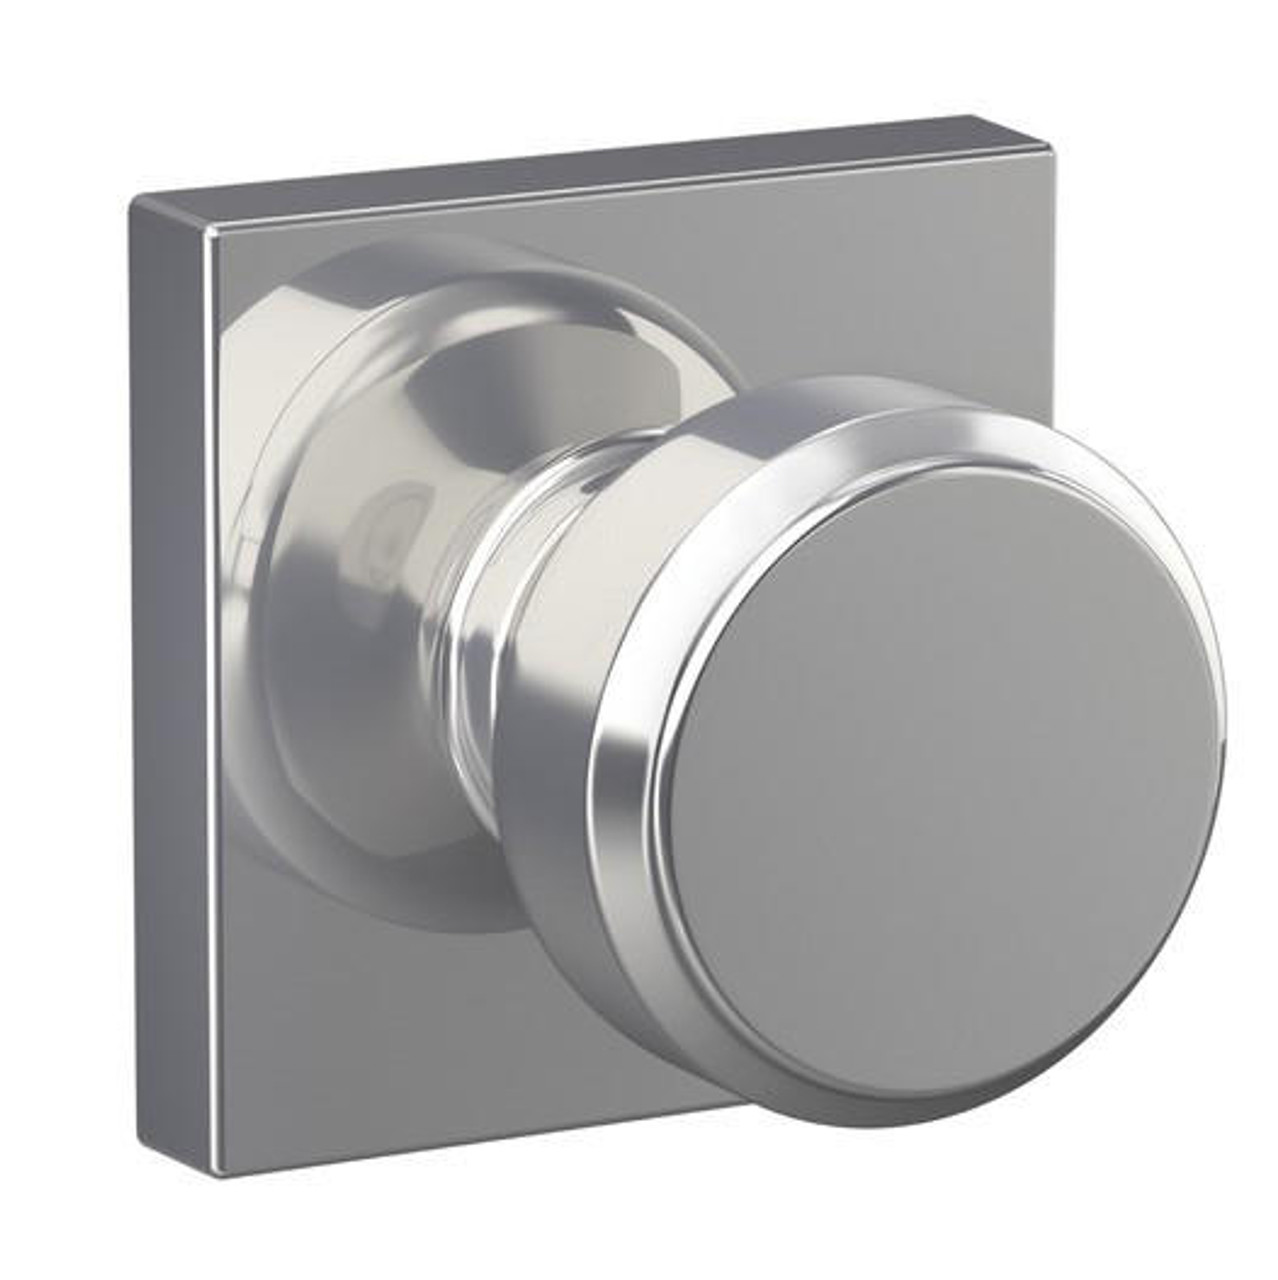  Schlage Lock F-Series Passage Knob Bowery Series with a Collins Rosette 